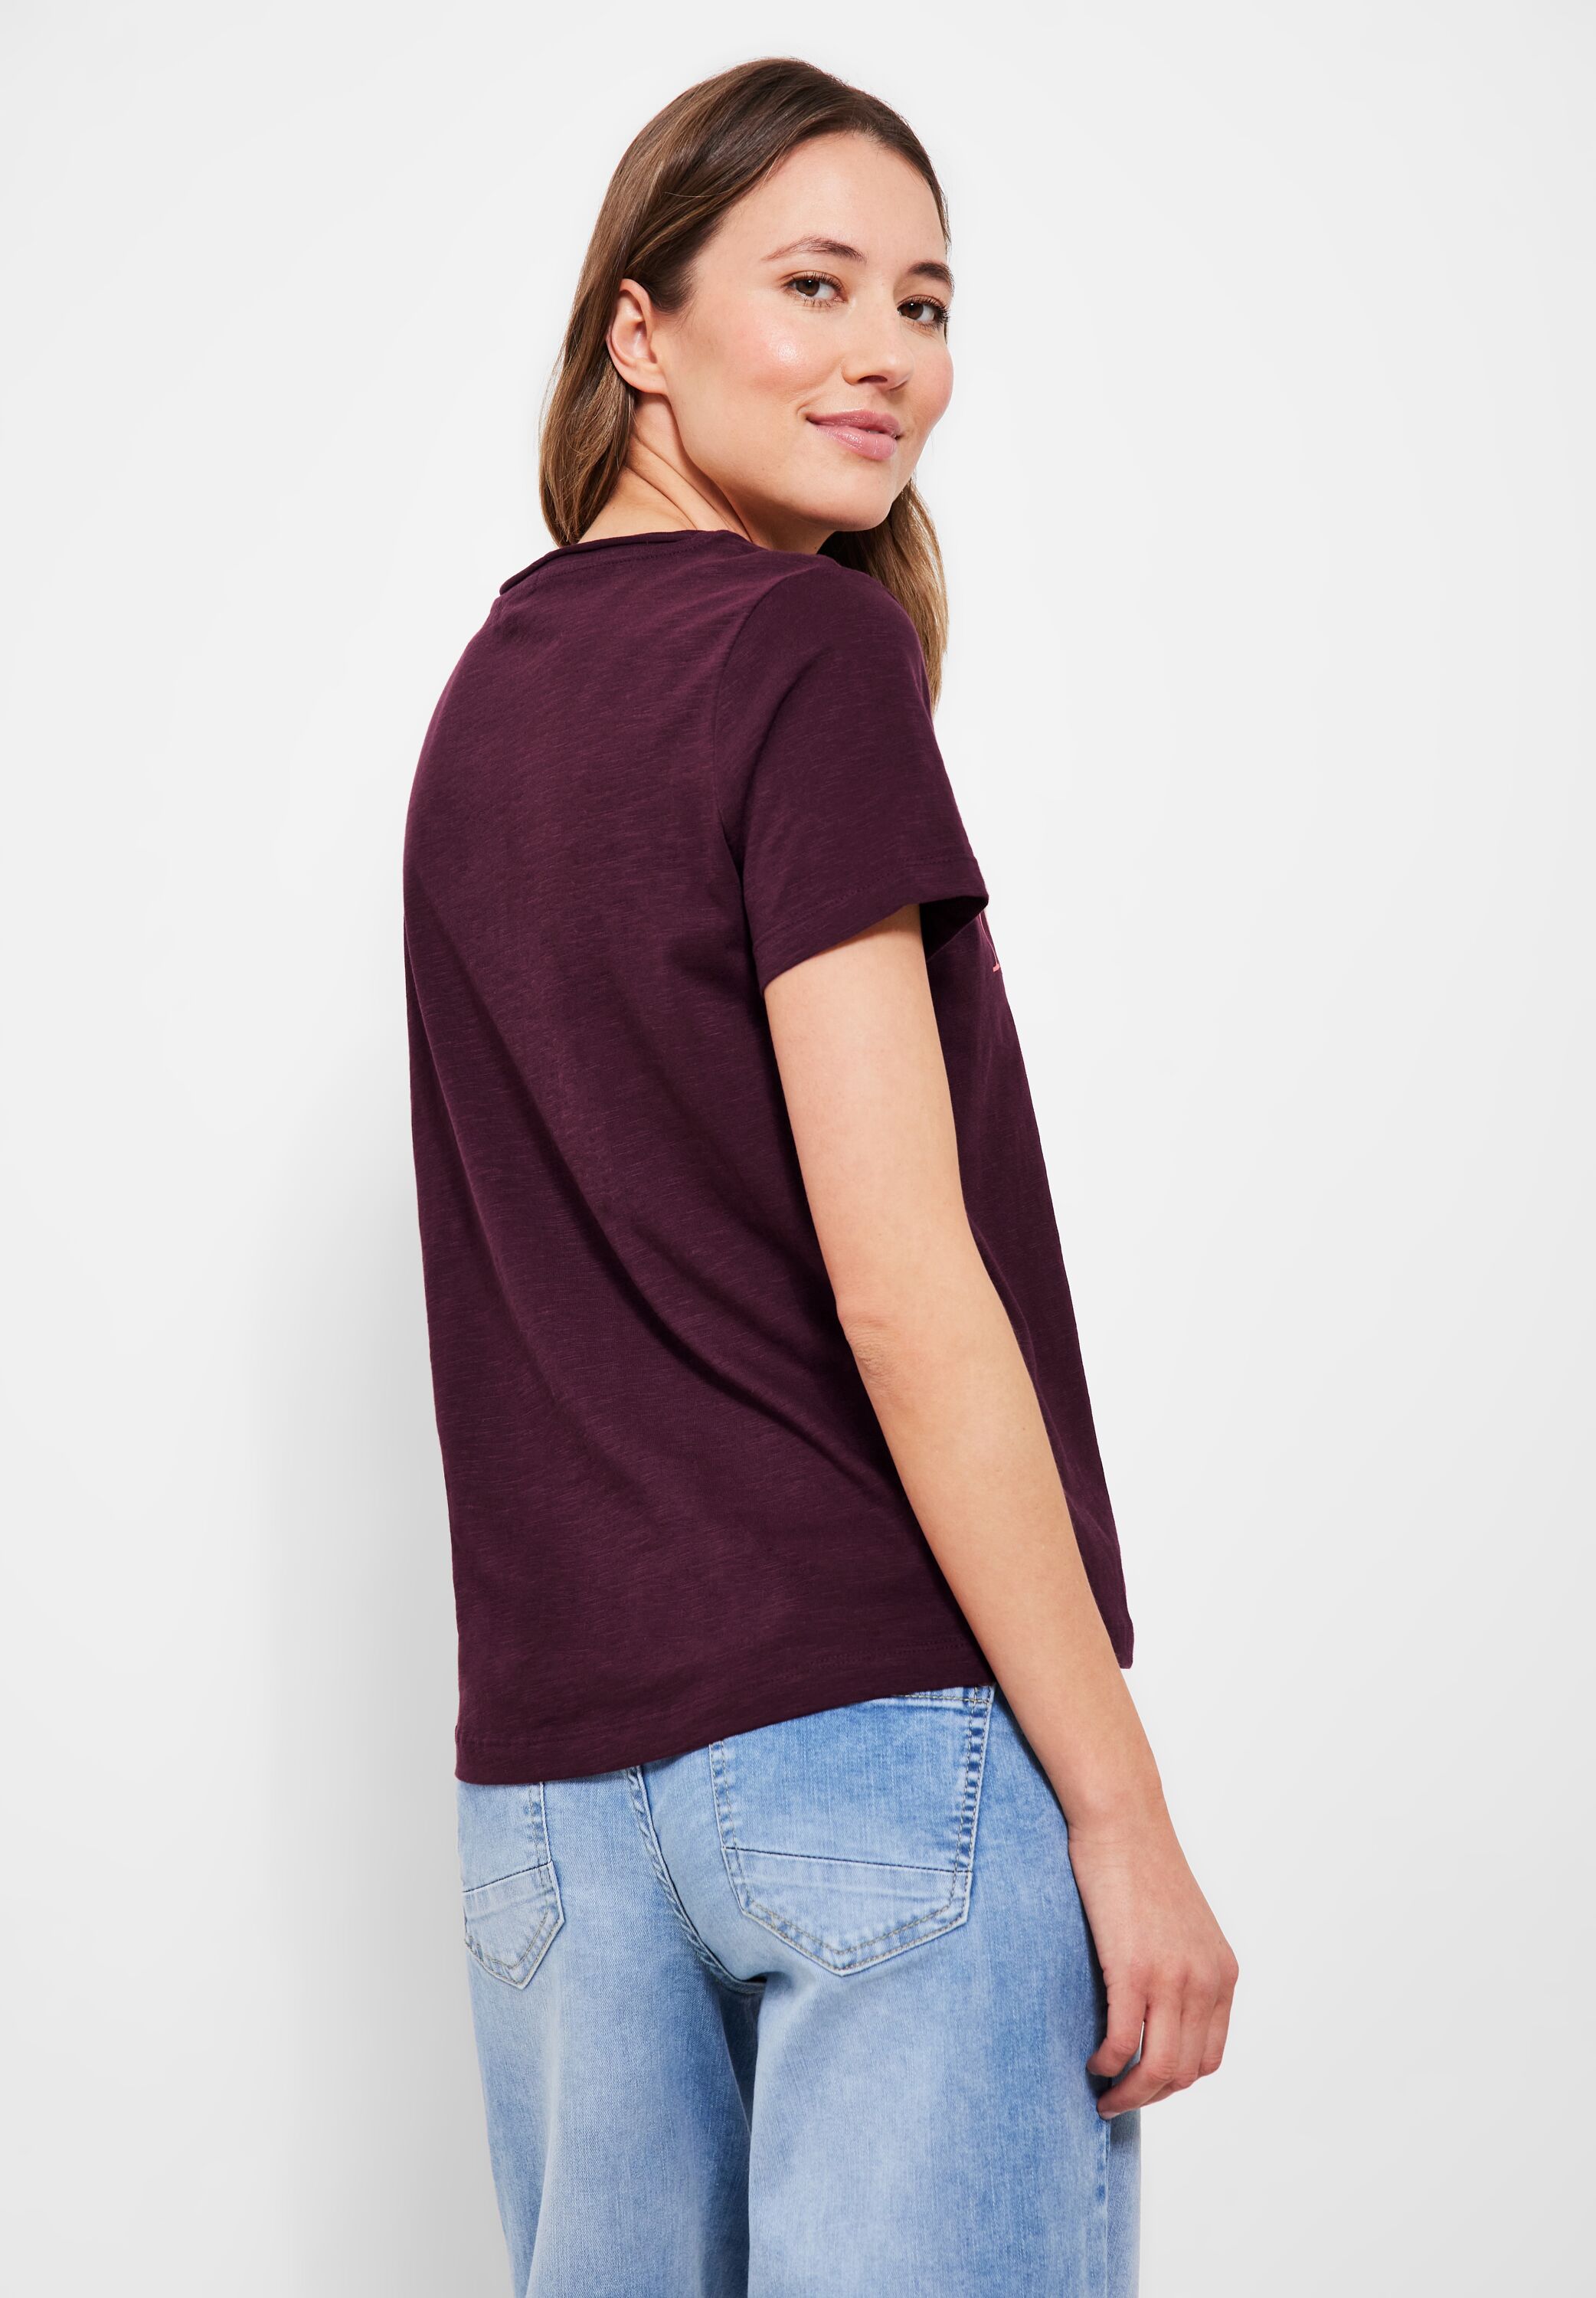 CECIL T-Shirt CONCEPT Red Wineberry Mode im B319637-34918 - SALE reduziert in